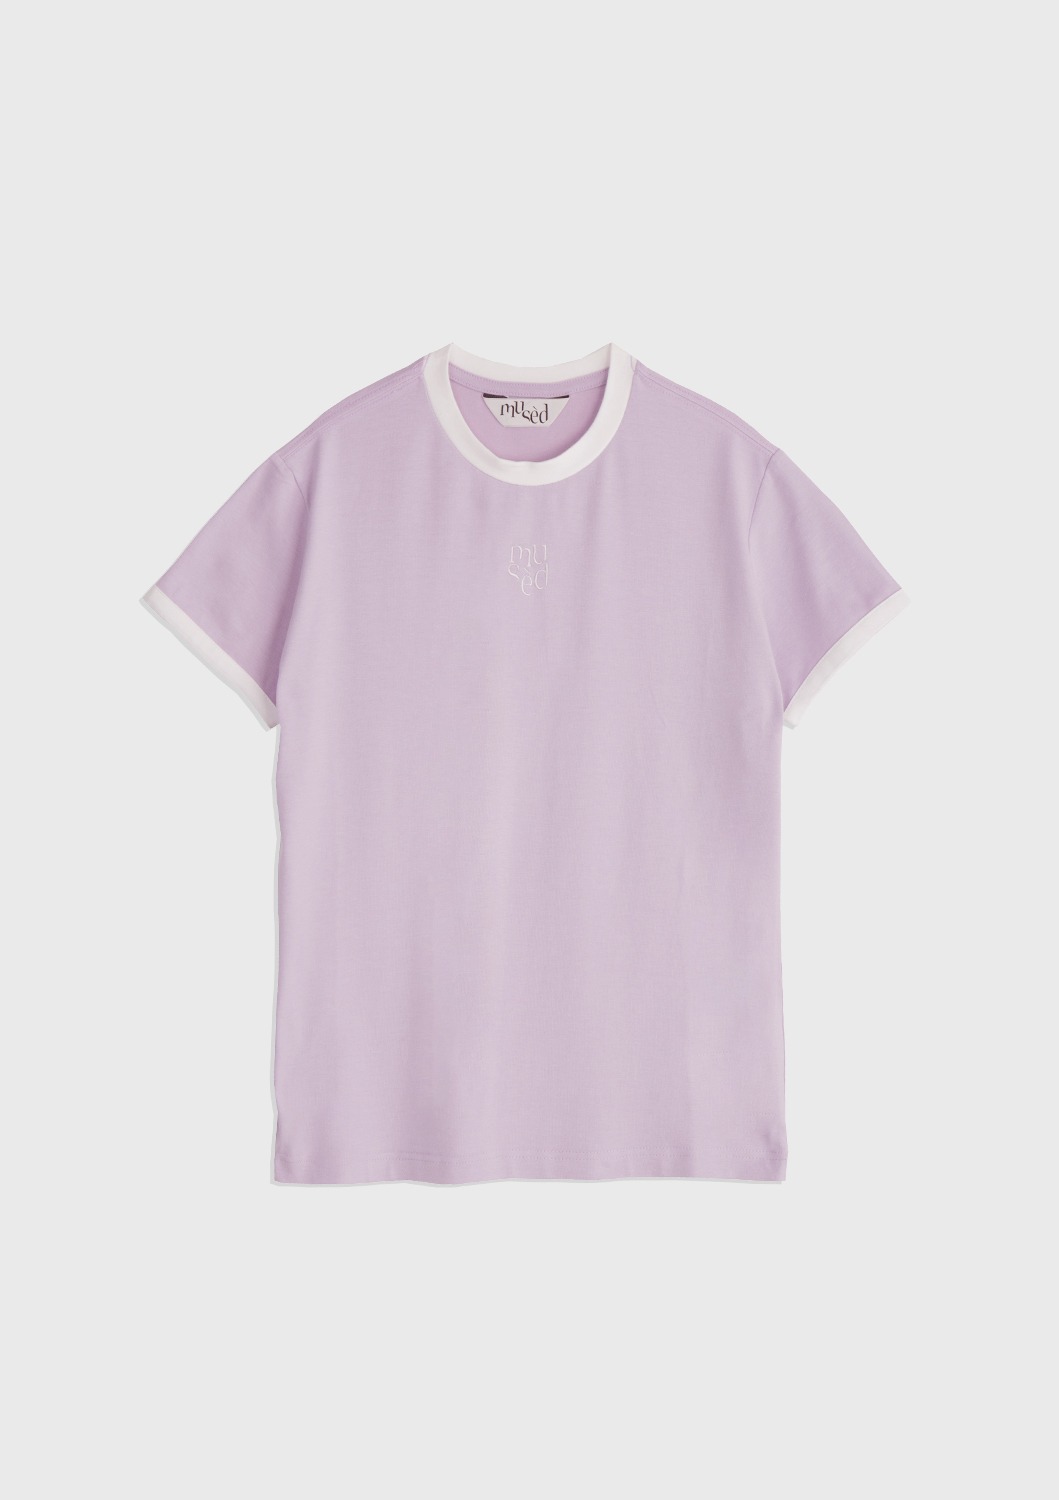 Contrast Rib Patched T-shirt - Lavender